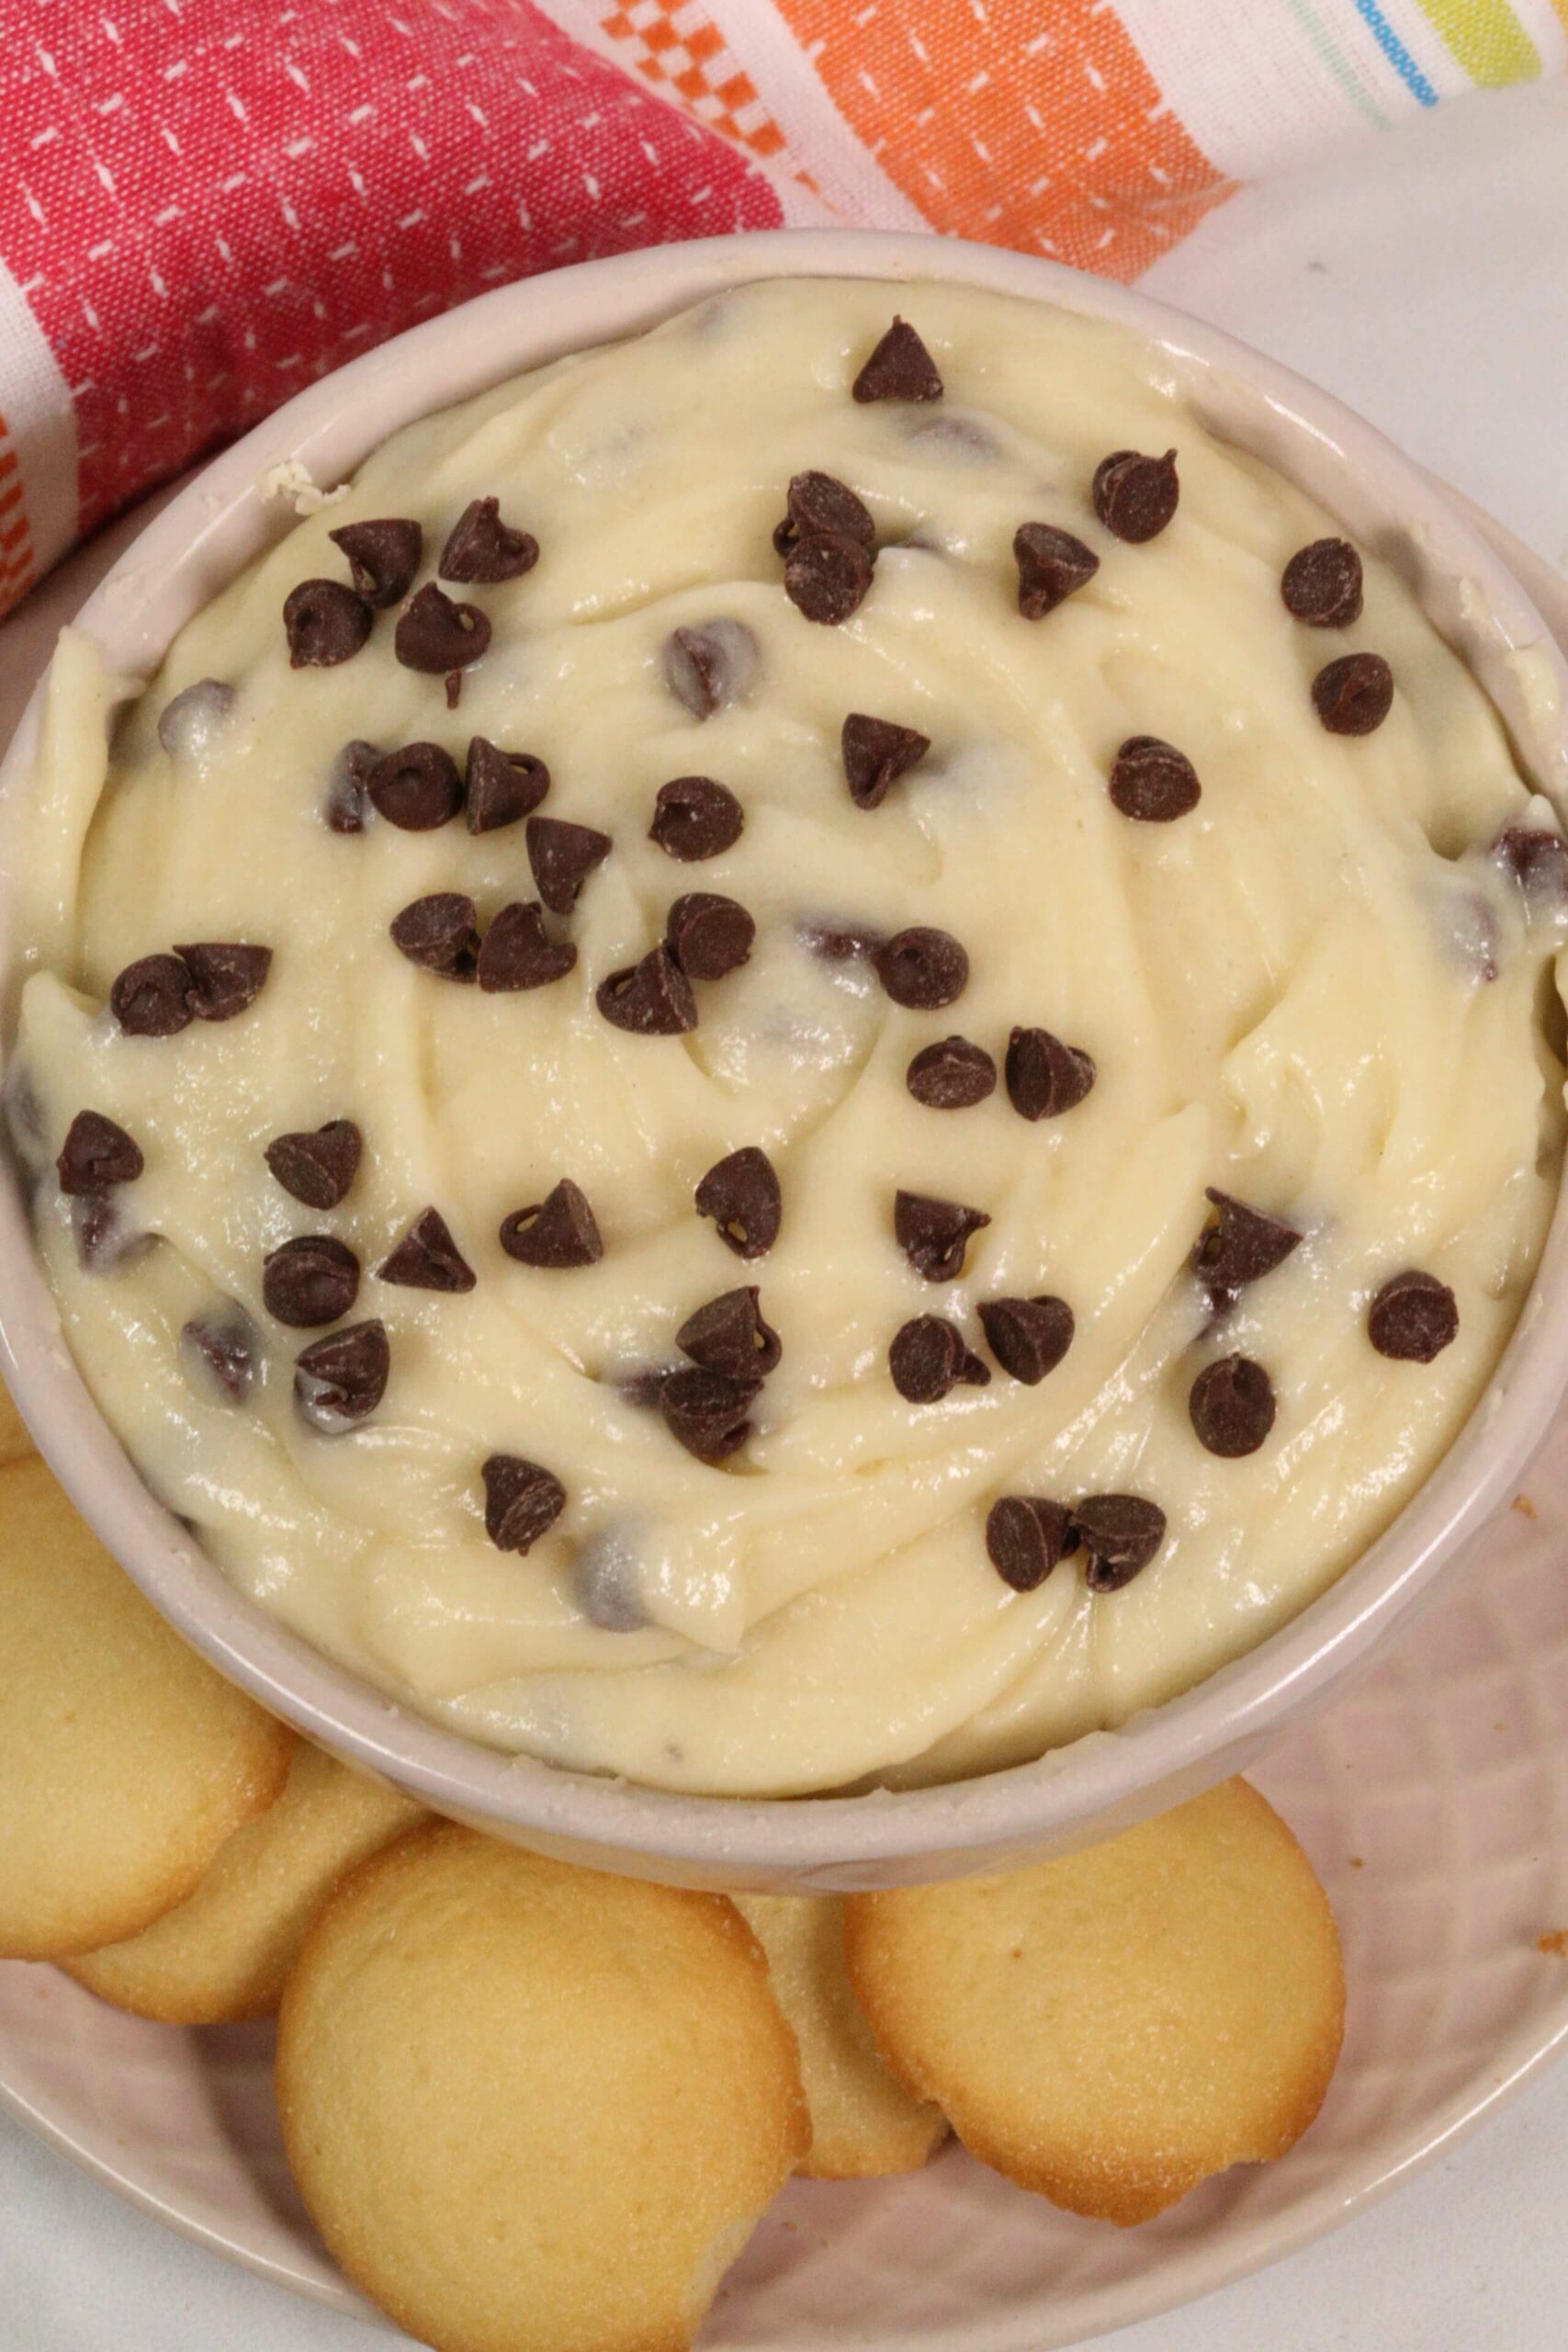 A top shot of the chocolate chip dip.